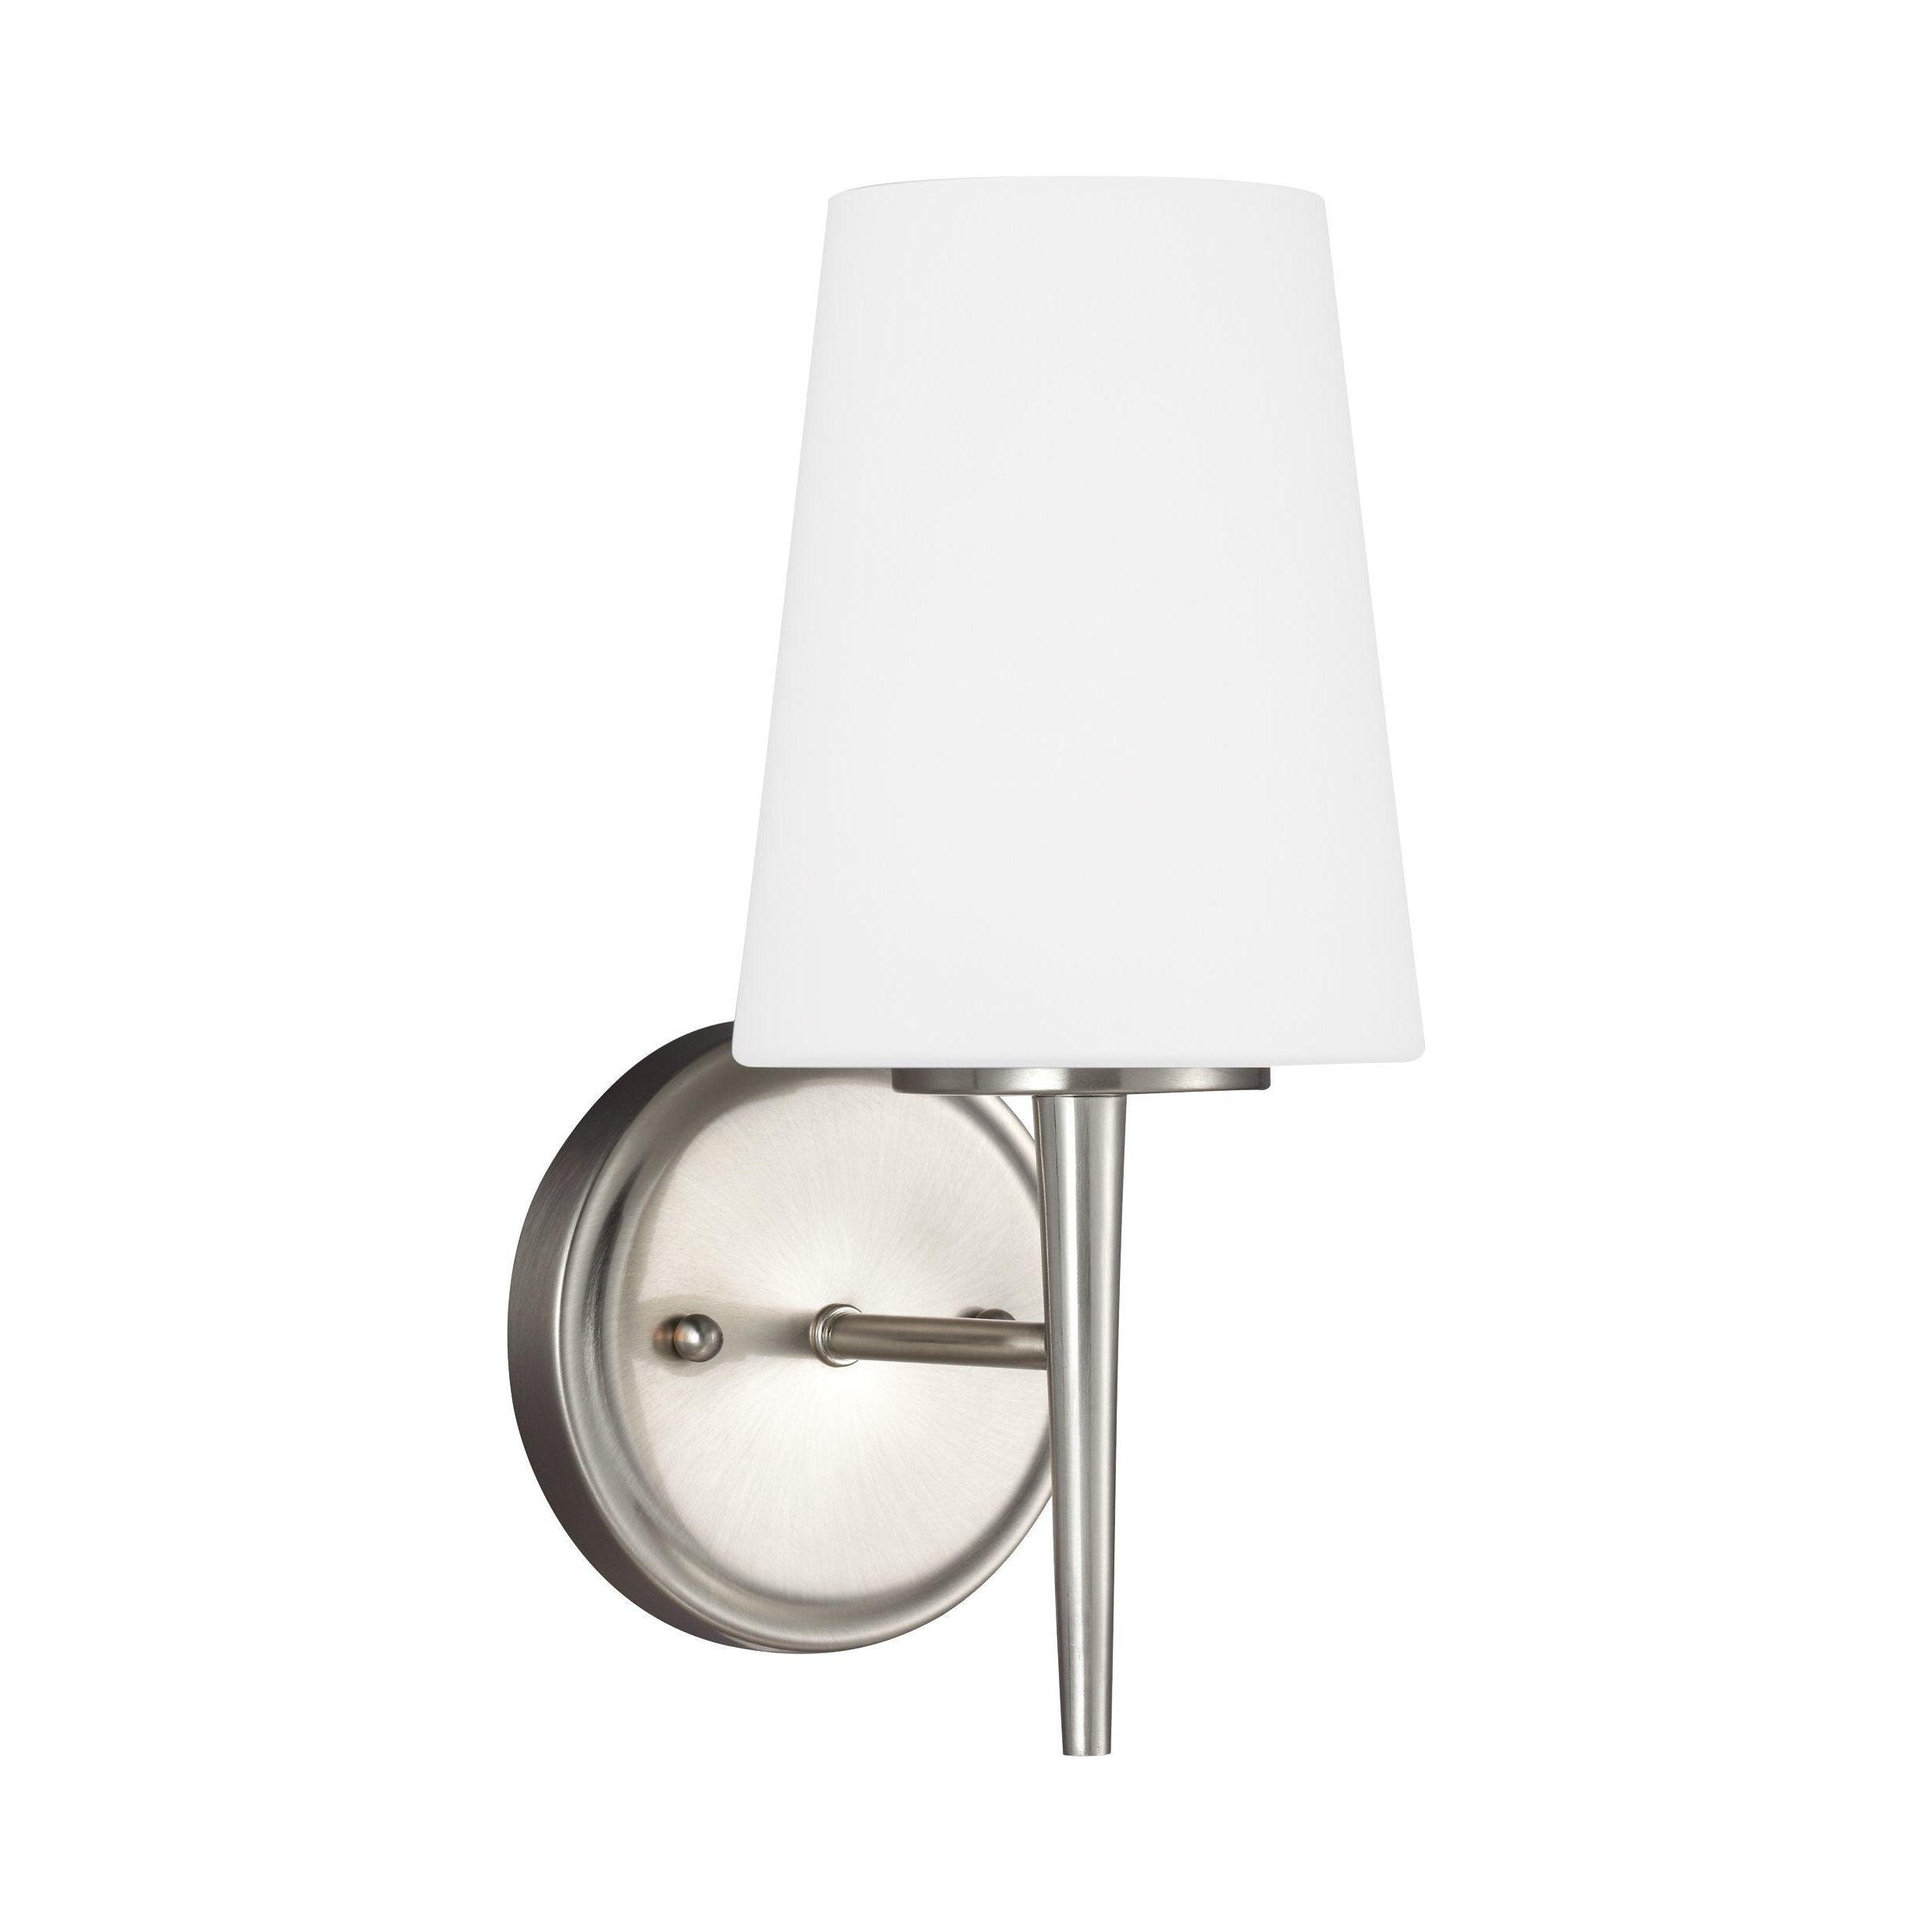 Driscoll Sconce Brushed Nickel